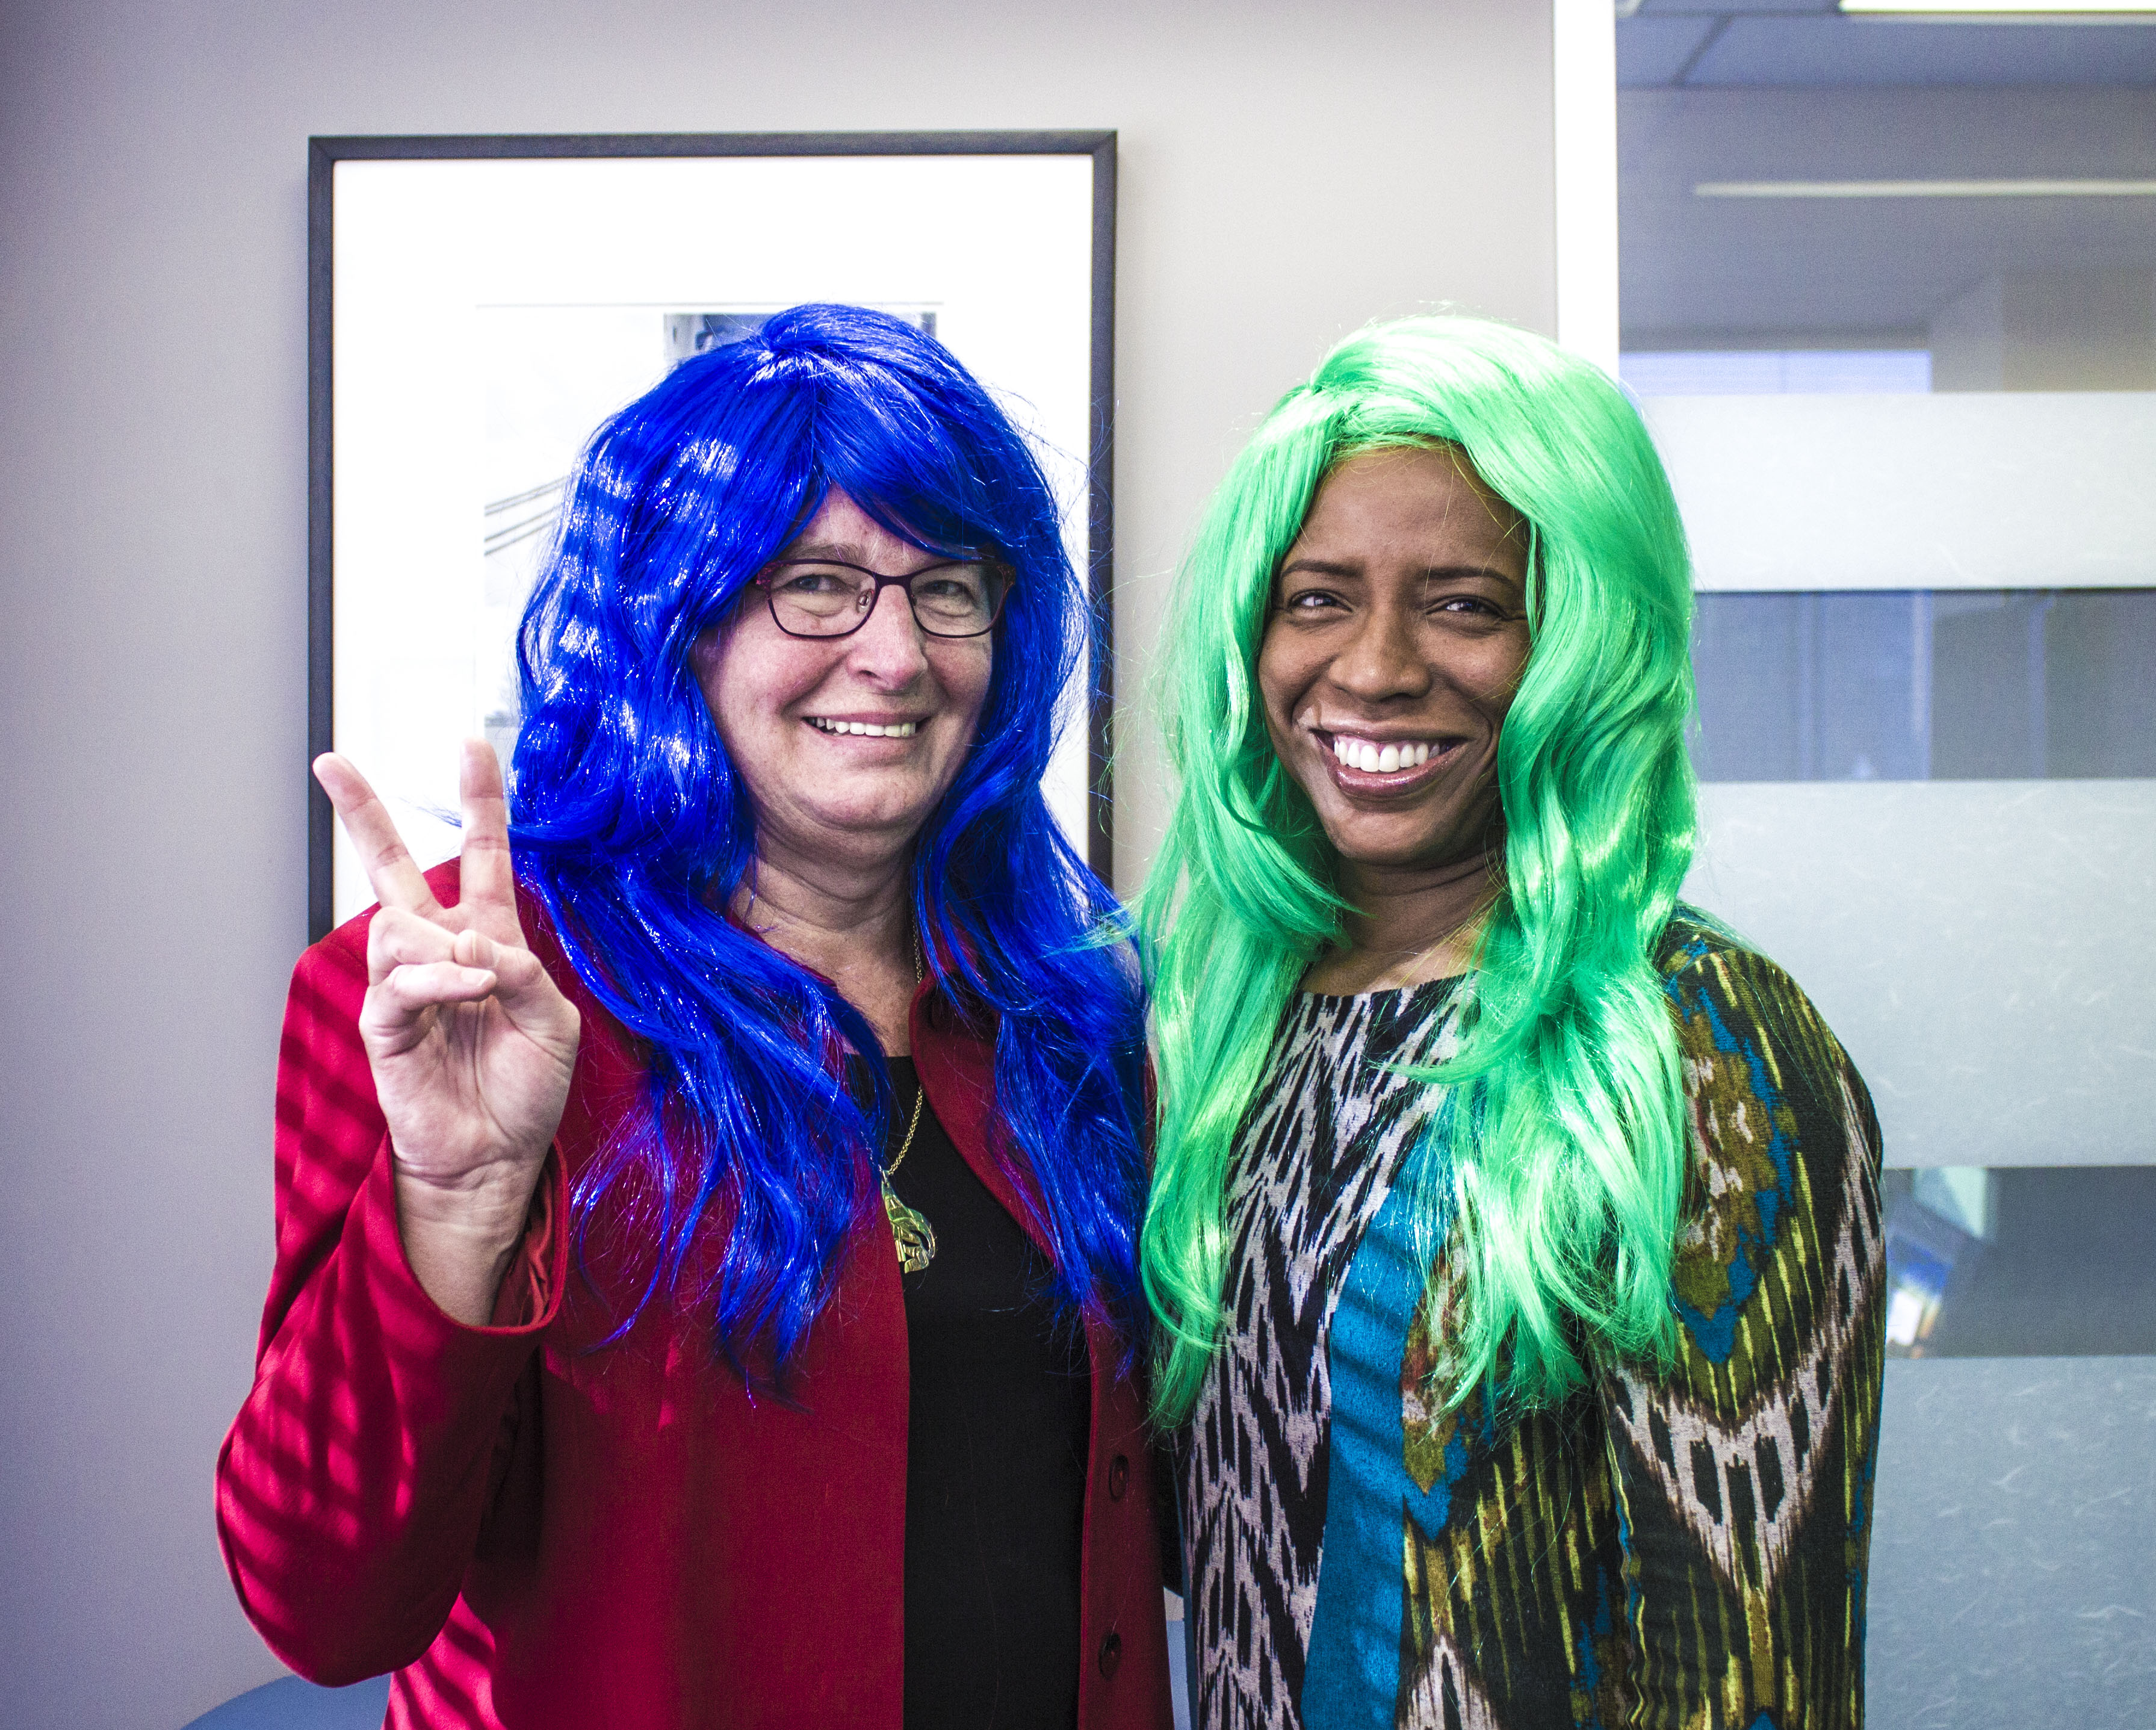 Chief Commissioner Barbara Hall stands with Executive Director Diane Carter. Diane wears a long bright green wig. Barbara wears a long, bright blue wig and holds up her peace fingers.